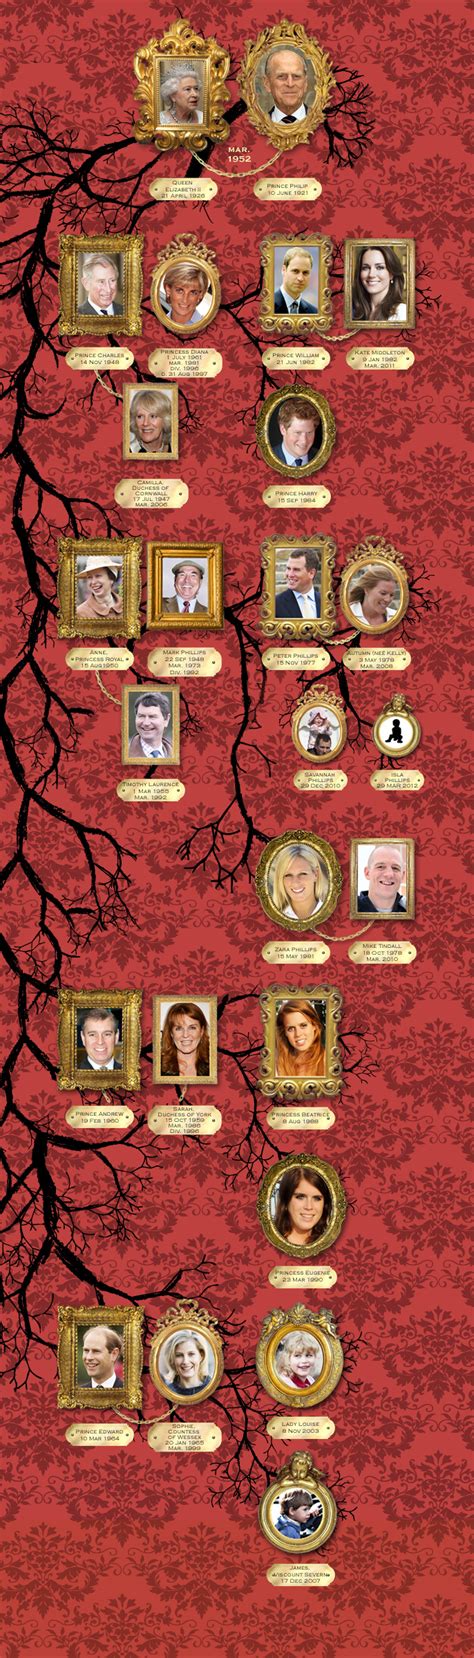 Despite technically being a princess of the. Pin by Pamela Vivian on Royalty | Royal family trees ...